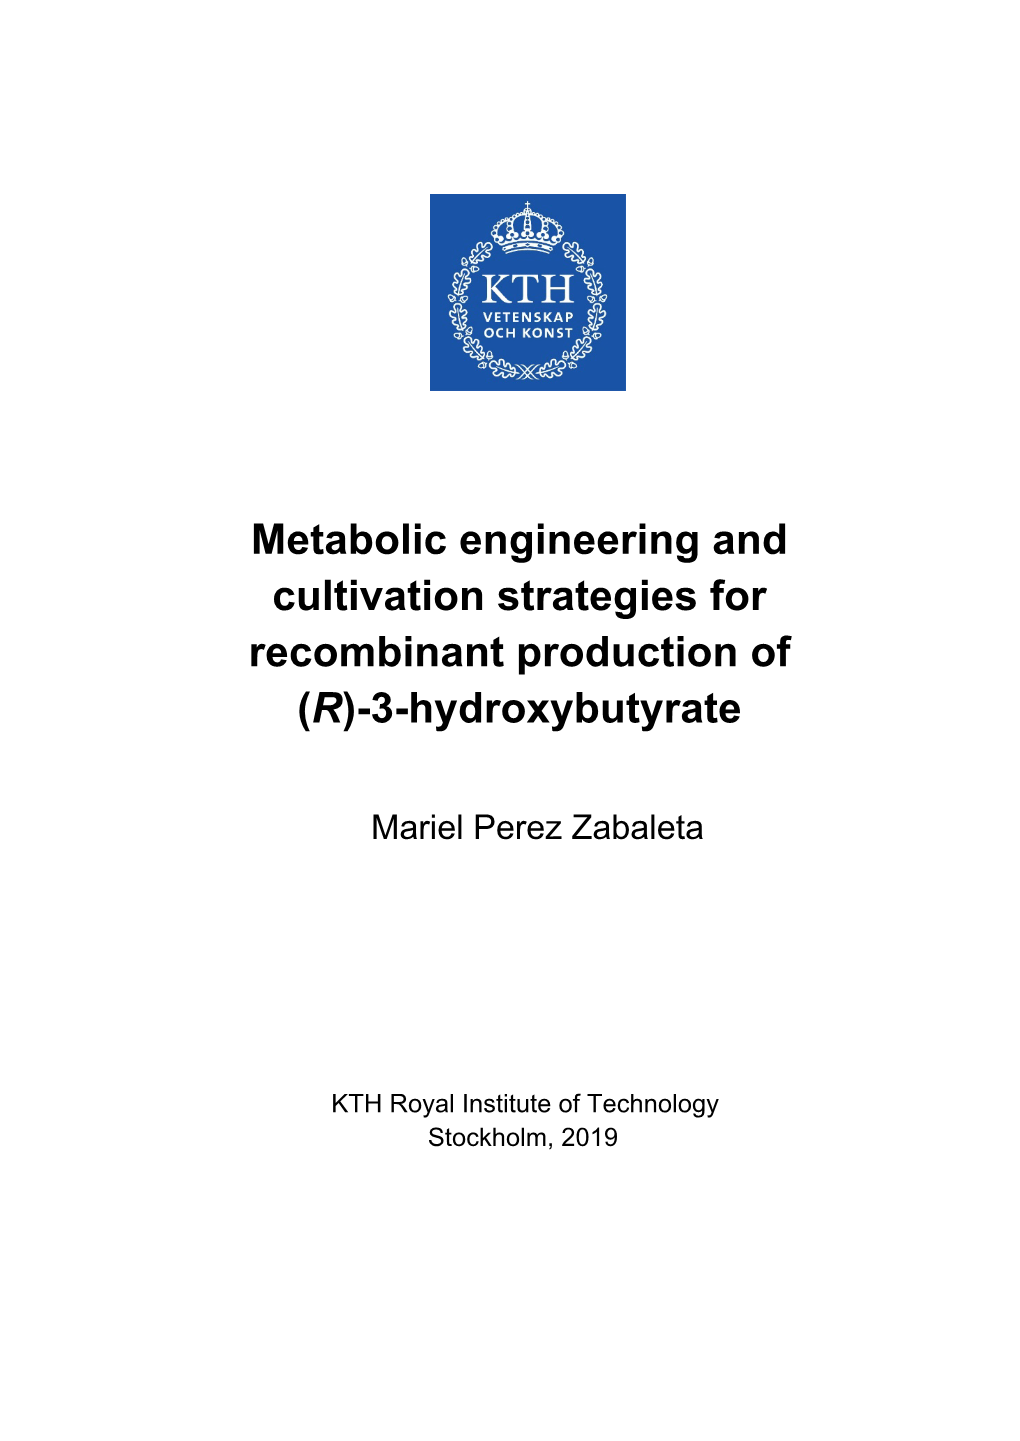 Metabolic Engineering and Cultivation Strategies for Recombinant Production of (R)-3-Hydroxybutyrate